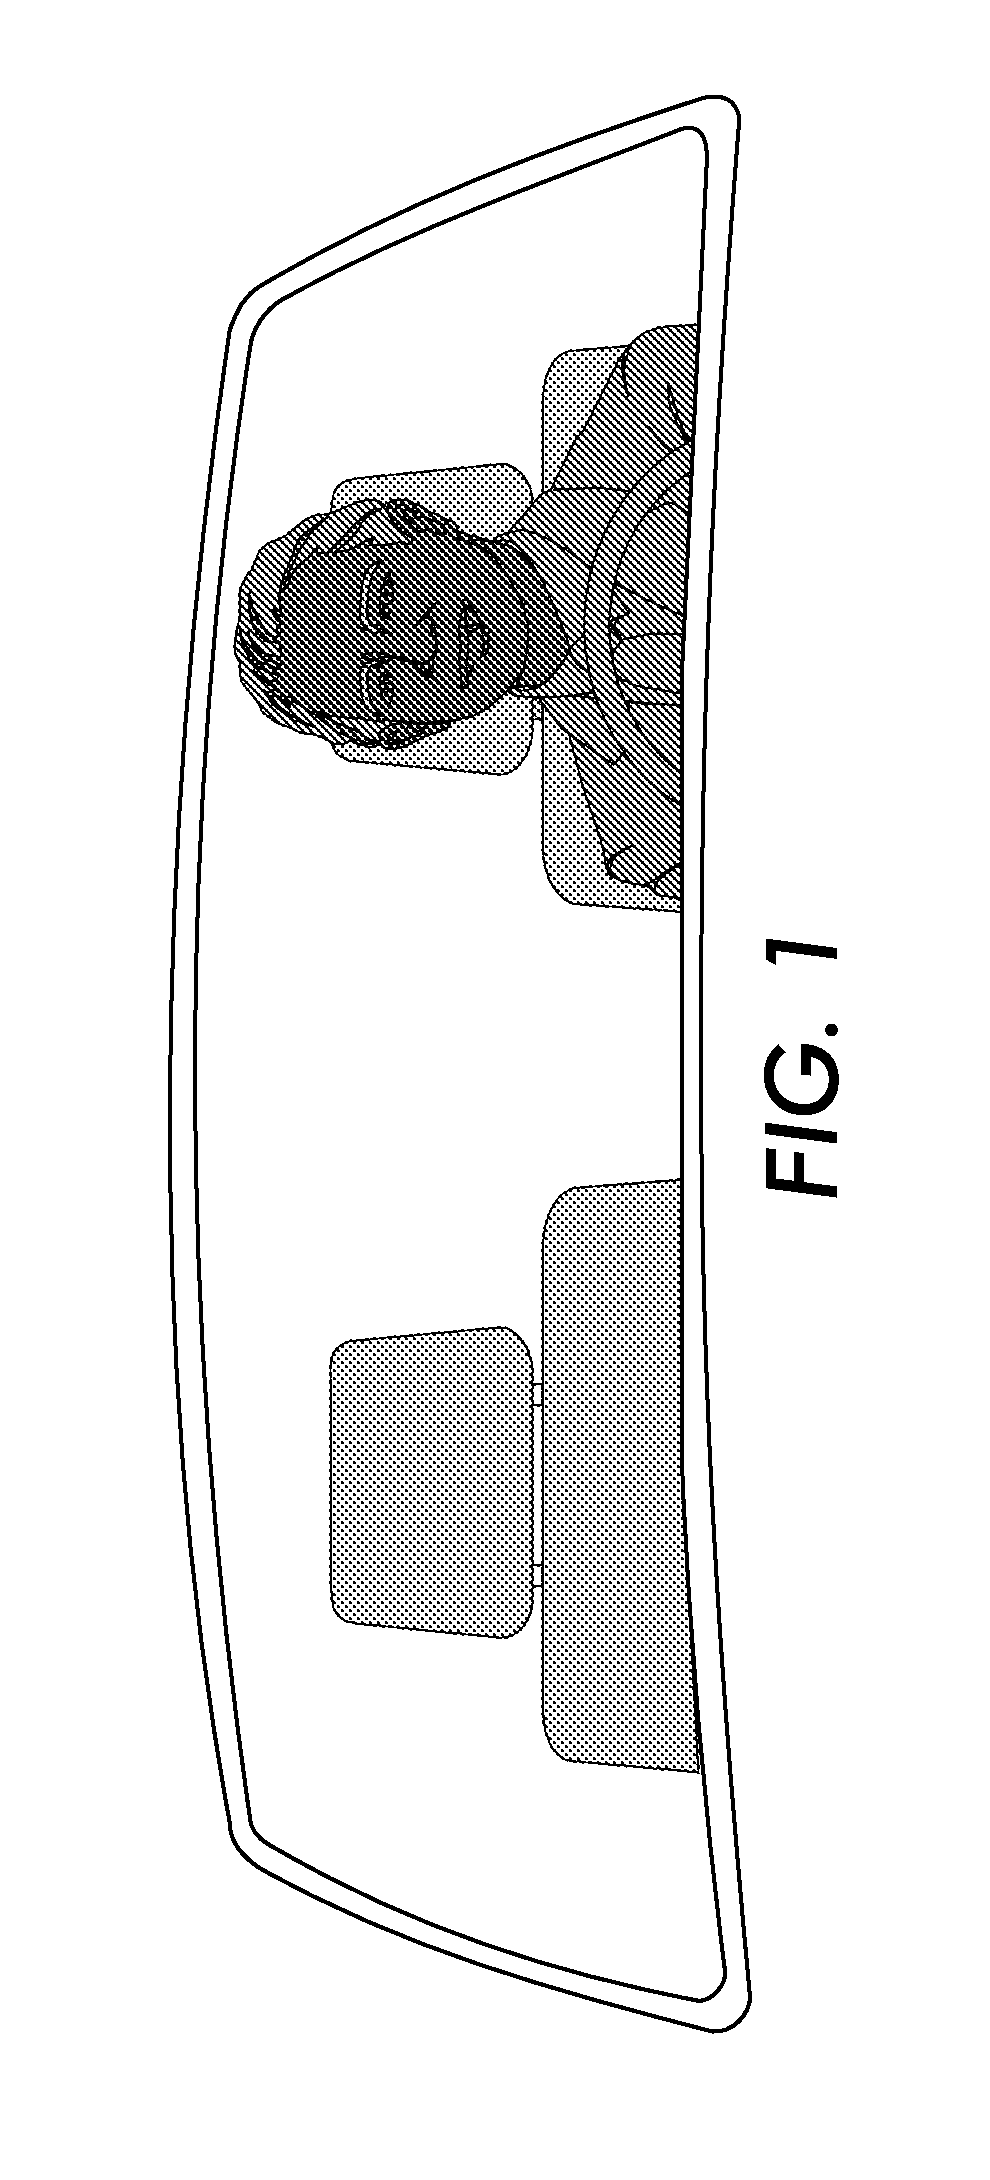 Vehicle occupancy detection via single band infrared imaging